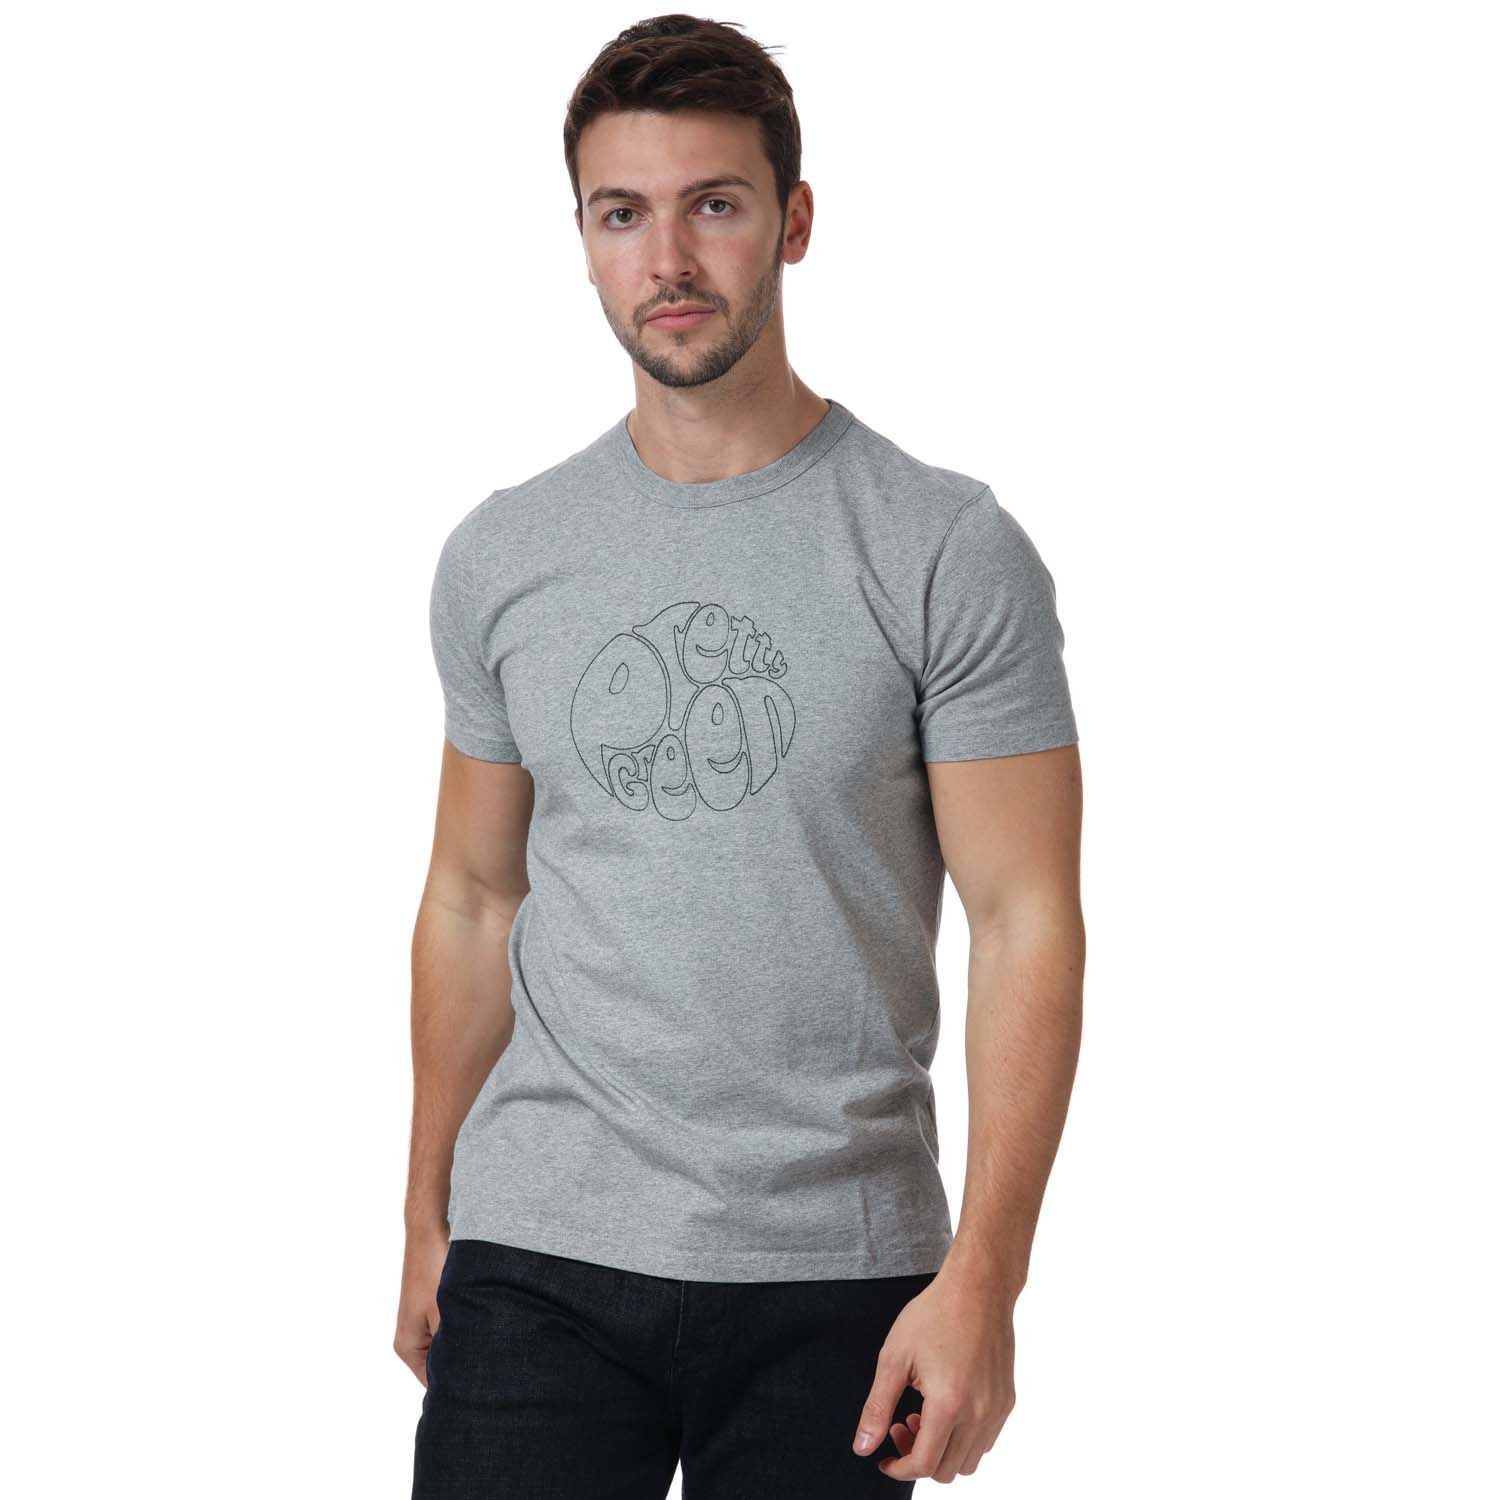 Pretty Green Minoris Logo T- Shirt in grey marl.- Ribbed crew neckline.- Short sleeves.- Signature Pretty Green logo is embroidered on the chest.- Slim fit.- 100% Organic Cotton.- Ref:G21Q3MUJER907G